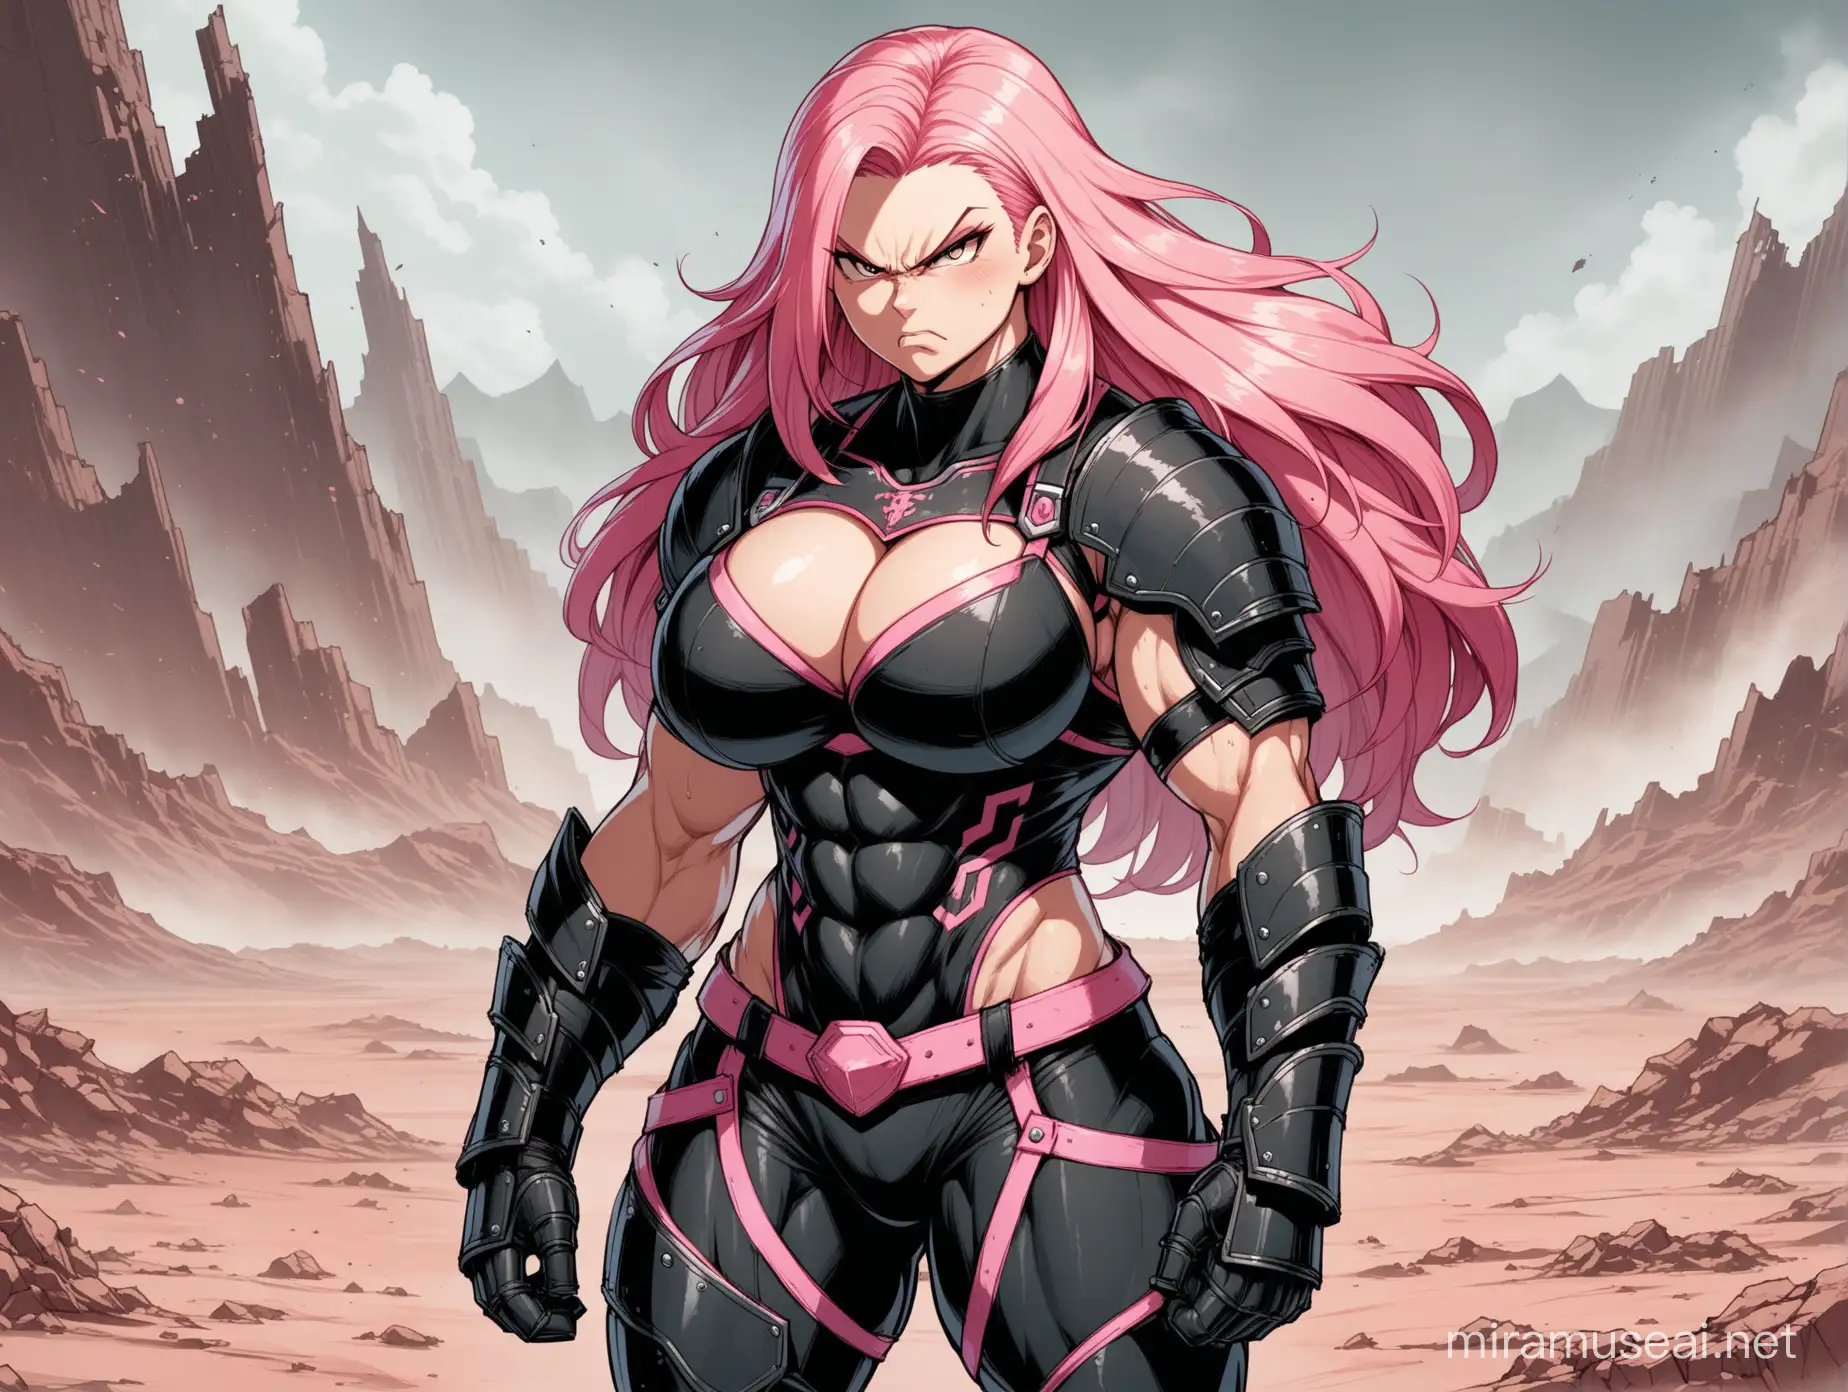 
a muscular, big, strong, peach-skinned, angry, infamous woman, black armor with pink edges, big breasts, sturdy booty, desolate wasteland background, long fluffy pink hair.